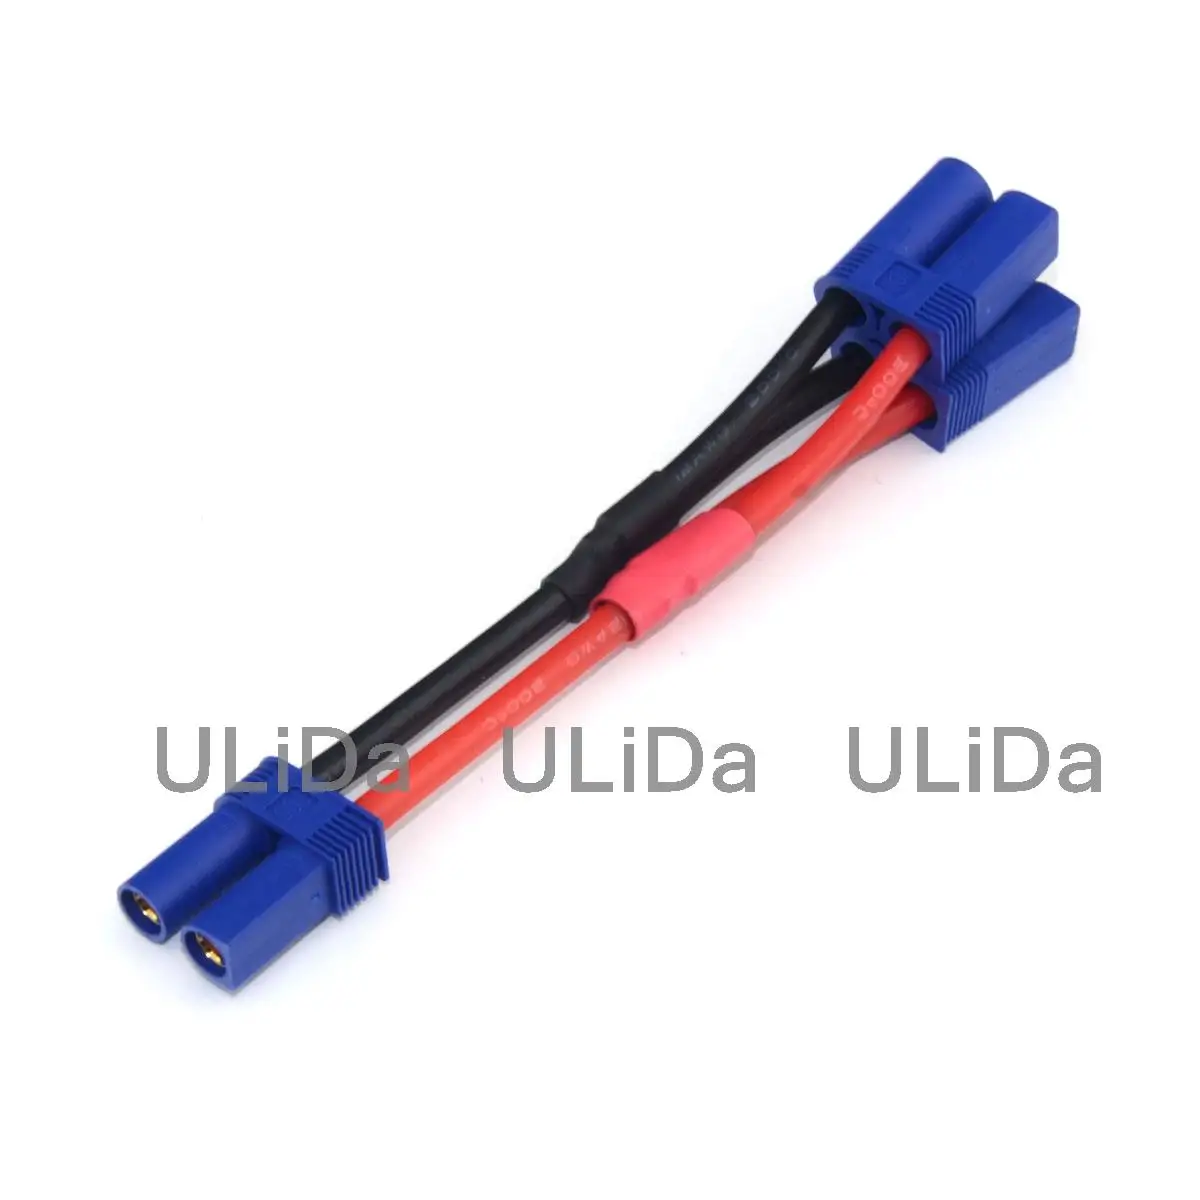 

EC5 Parallel (2 Male / 1 Female) Lipo Battery Connector Adapter with 10CM 12awg Wire Y